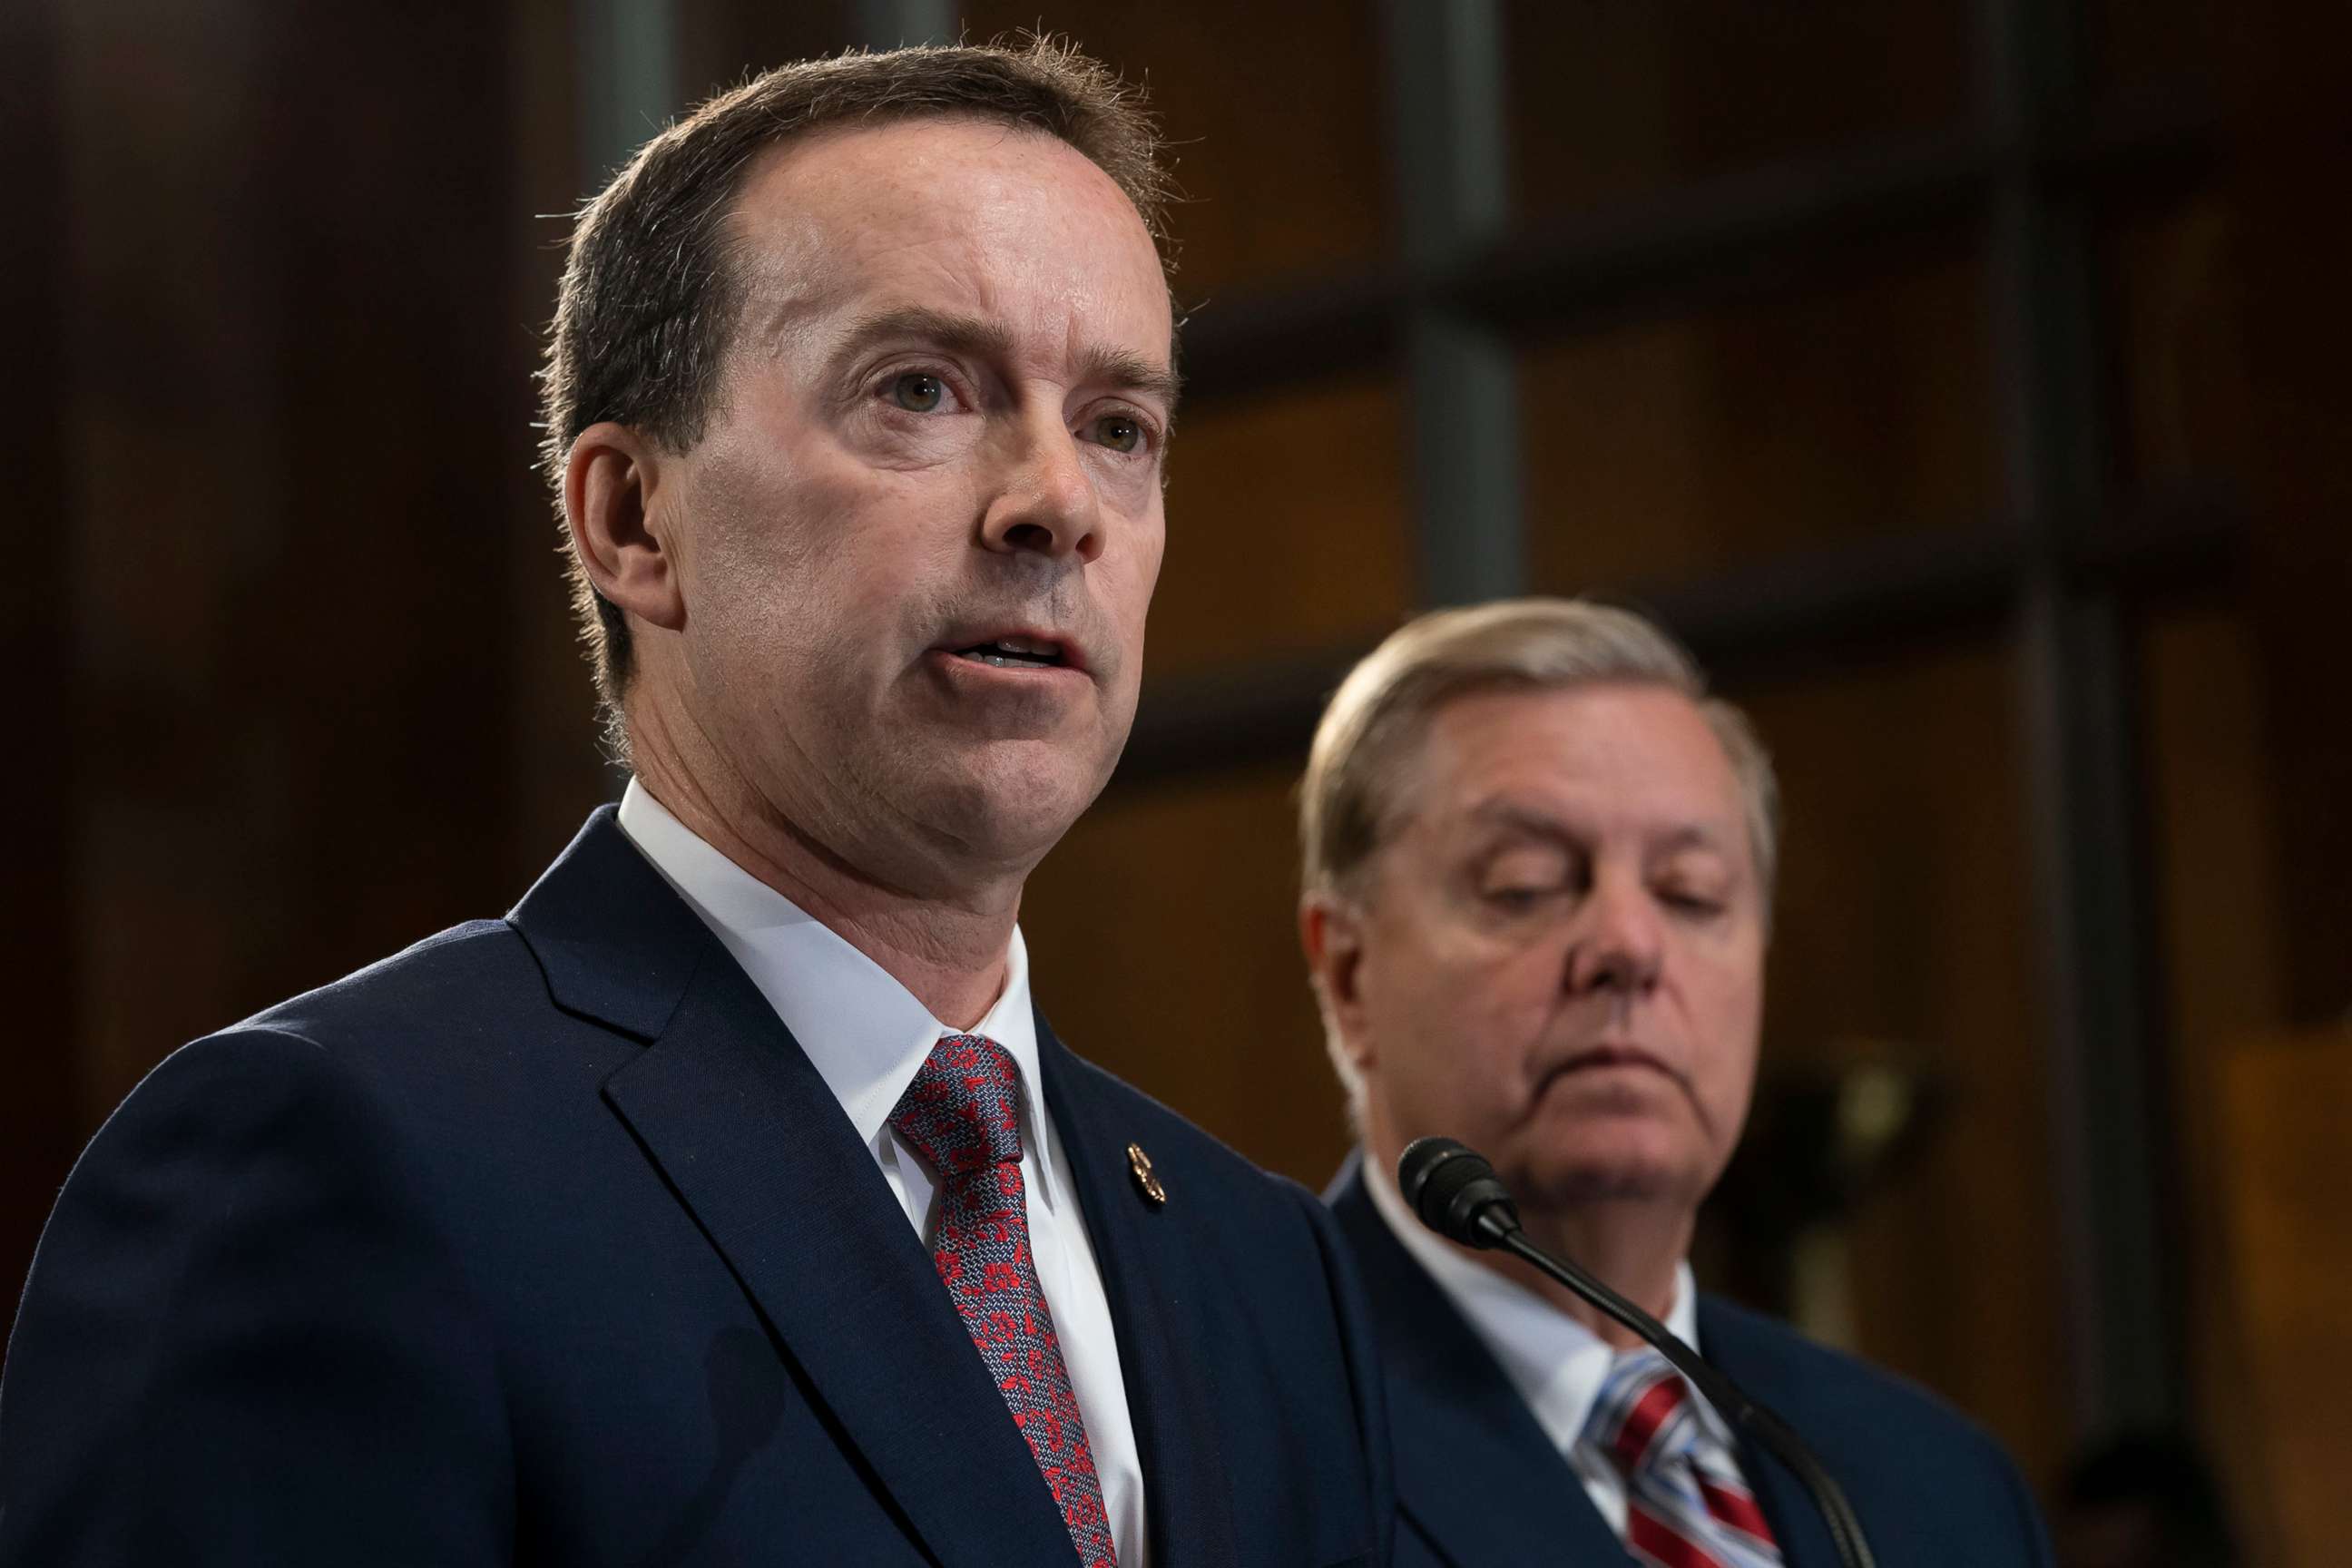 PHOTO: In this May 15, 2019 file photo, acting U.S. Customs and Border Protection Commissioner John Sanders, left, joins Senate Judiciary Committee Chairman Lindsey Graham on Capitol Hill in Washington.